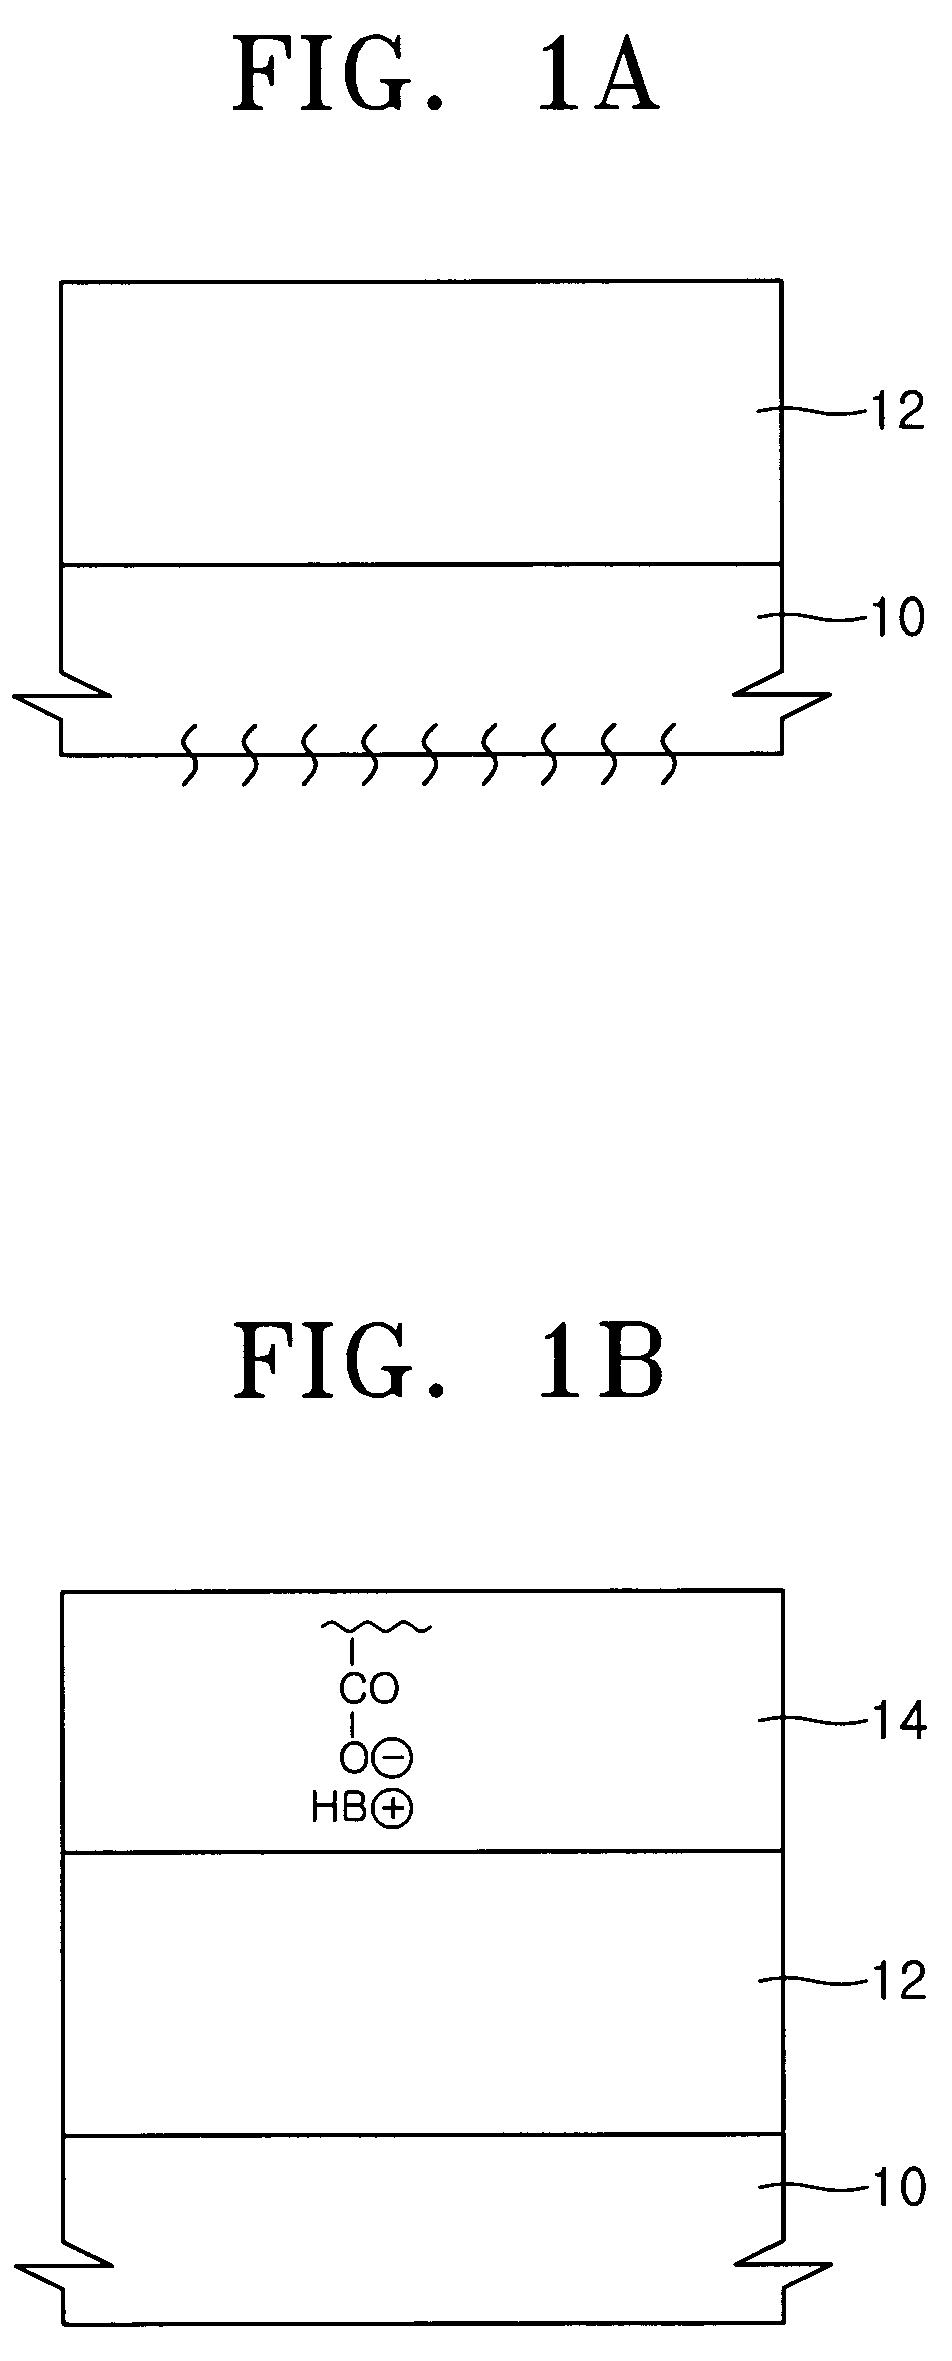 Top coating composition for photoresist and method of forming photoresist pattern using same